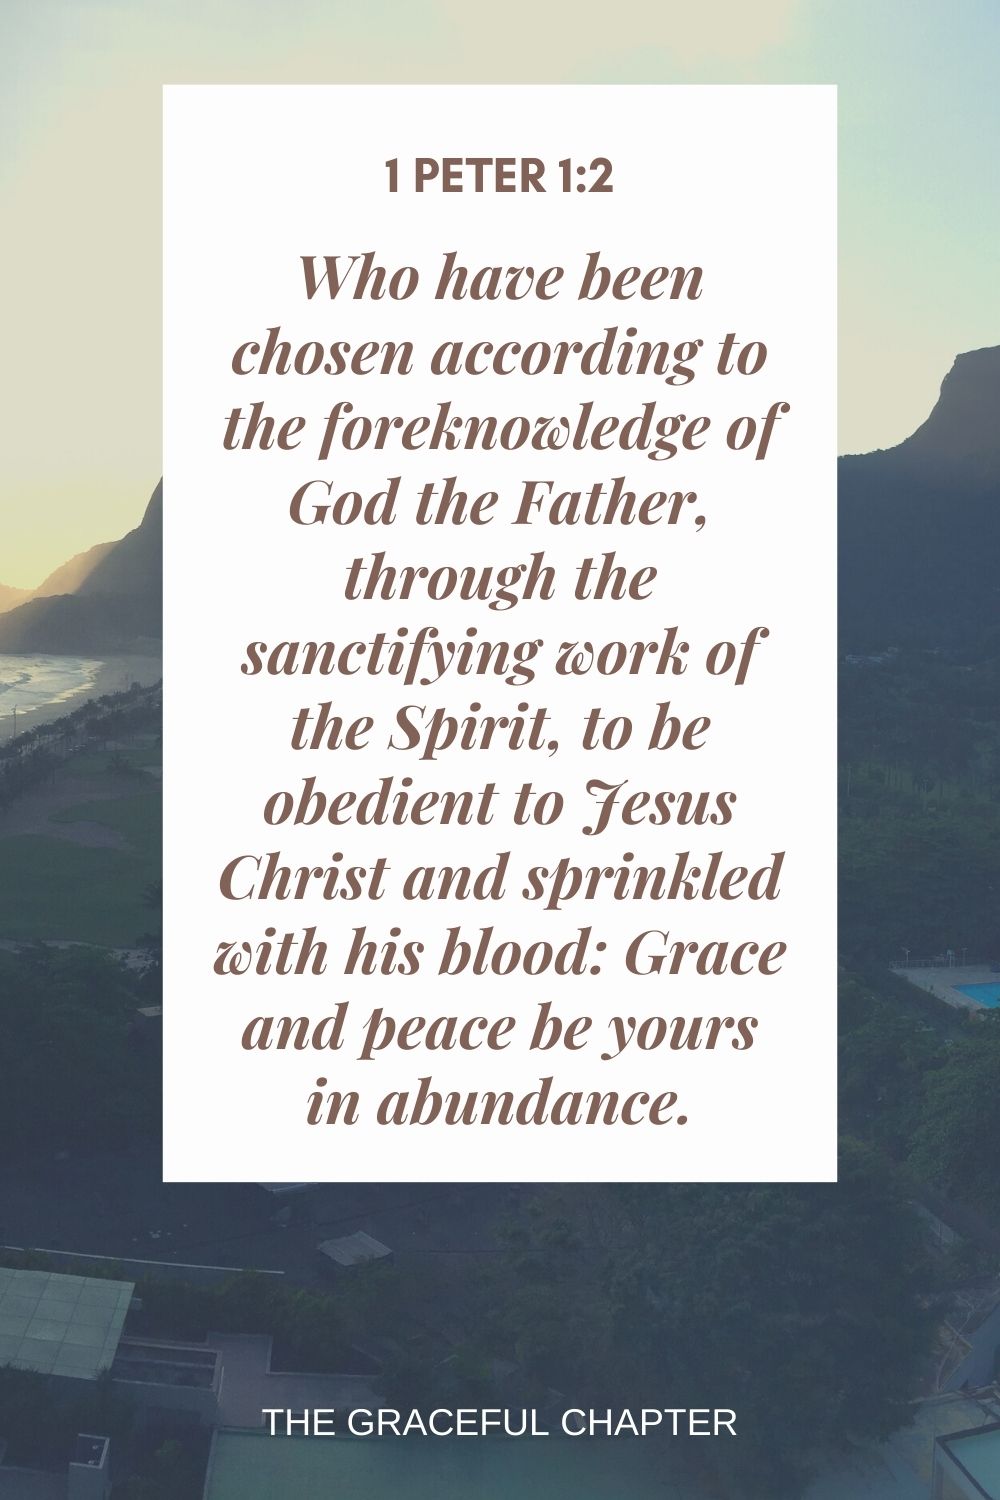 Who have been chosen according to the foreknowledge of God the Father, through the sanctifying work of the Spirit, to be obedient to Jesus Christ and sprinkled with his blood: Grace and peace be yours in abundance. 1 Peter 1:2